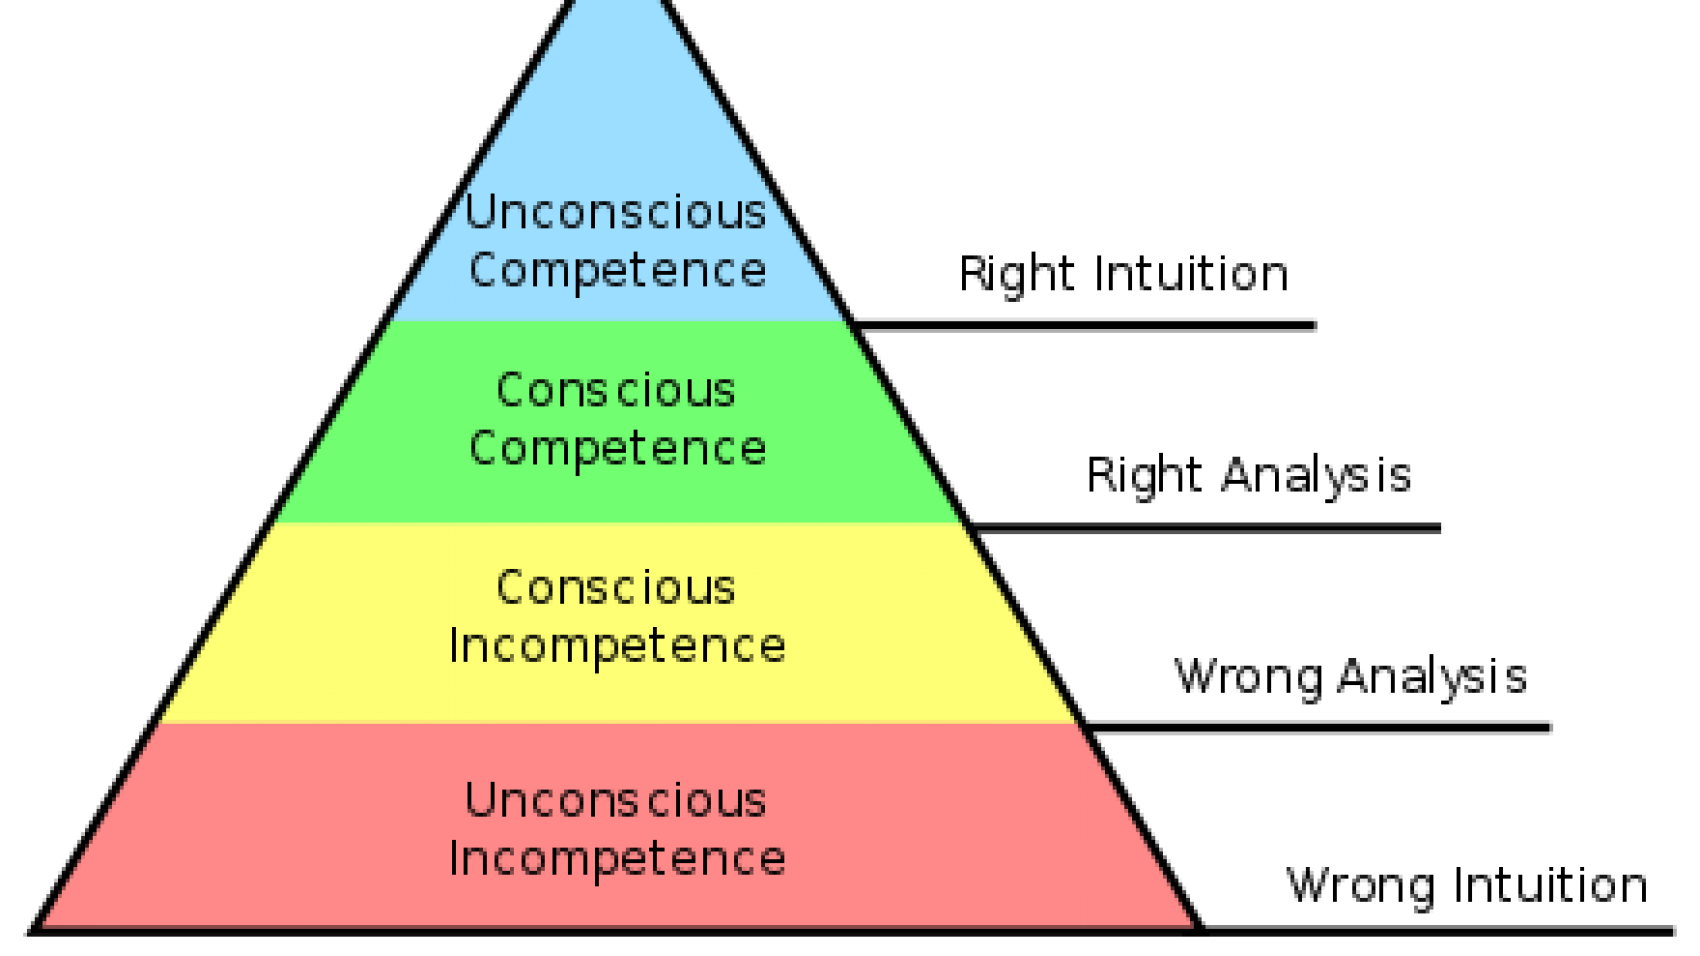 440px-Competence_Hierarchy_adapted_from_Noel_Burch_by_Igor_Kokcharov.svg